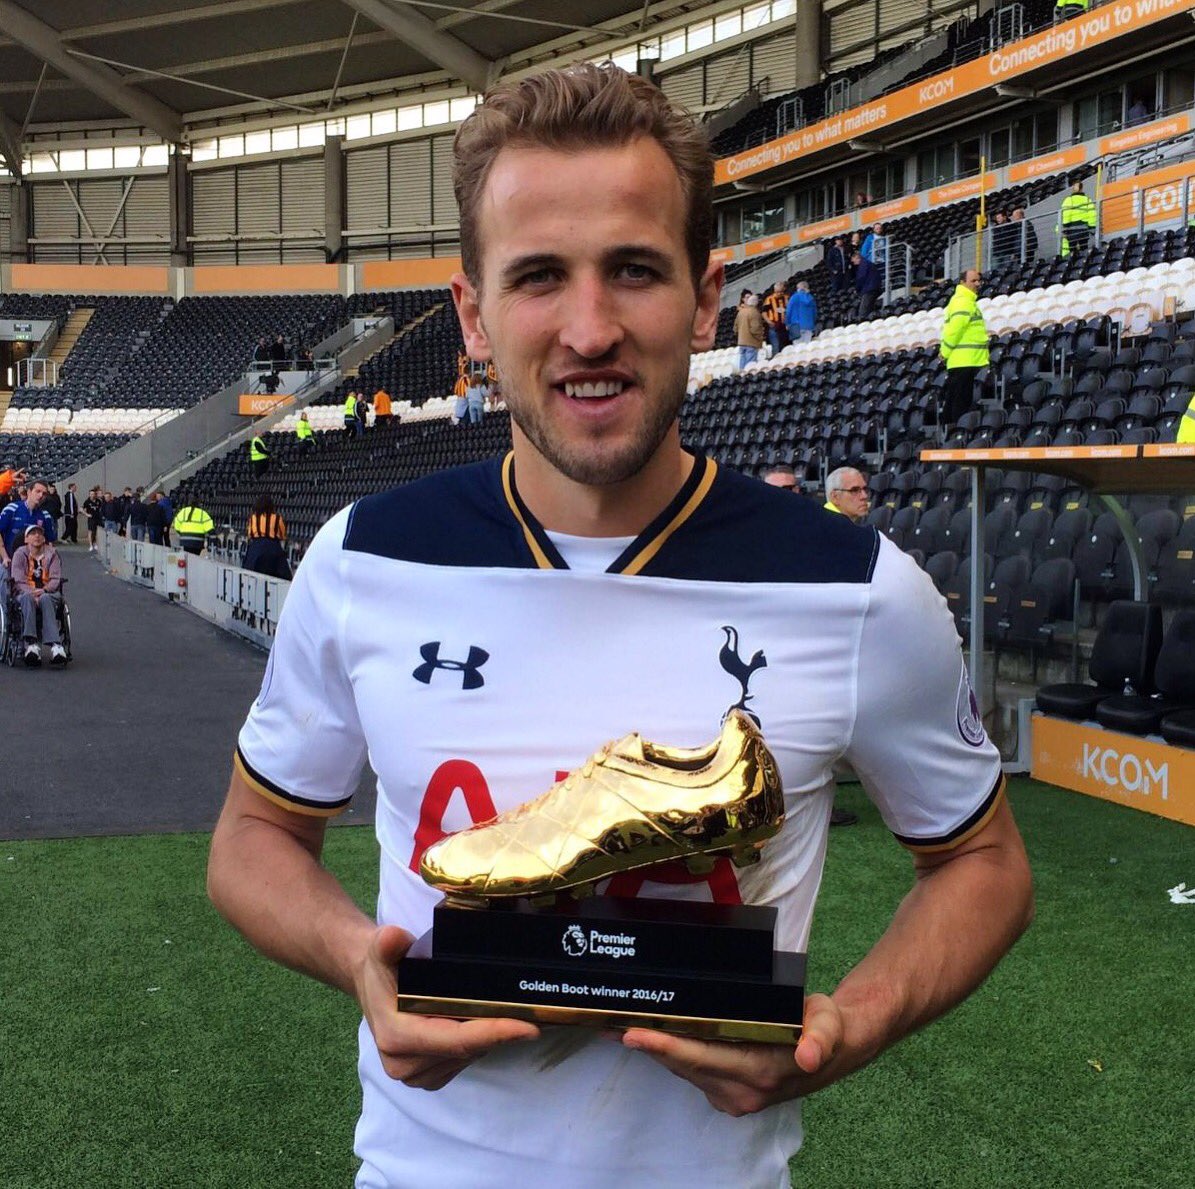 So proud to win this beauty again! Thanks to the team for helping me achieve this! Perfect week to finish the season! #COYS #GoldenBoot